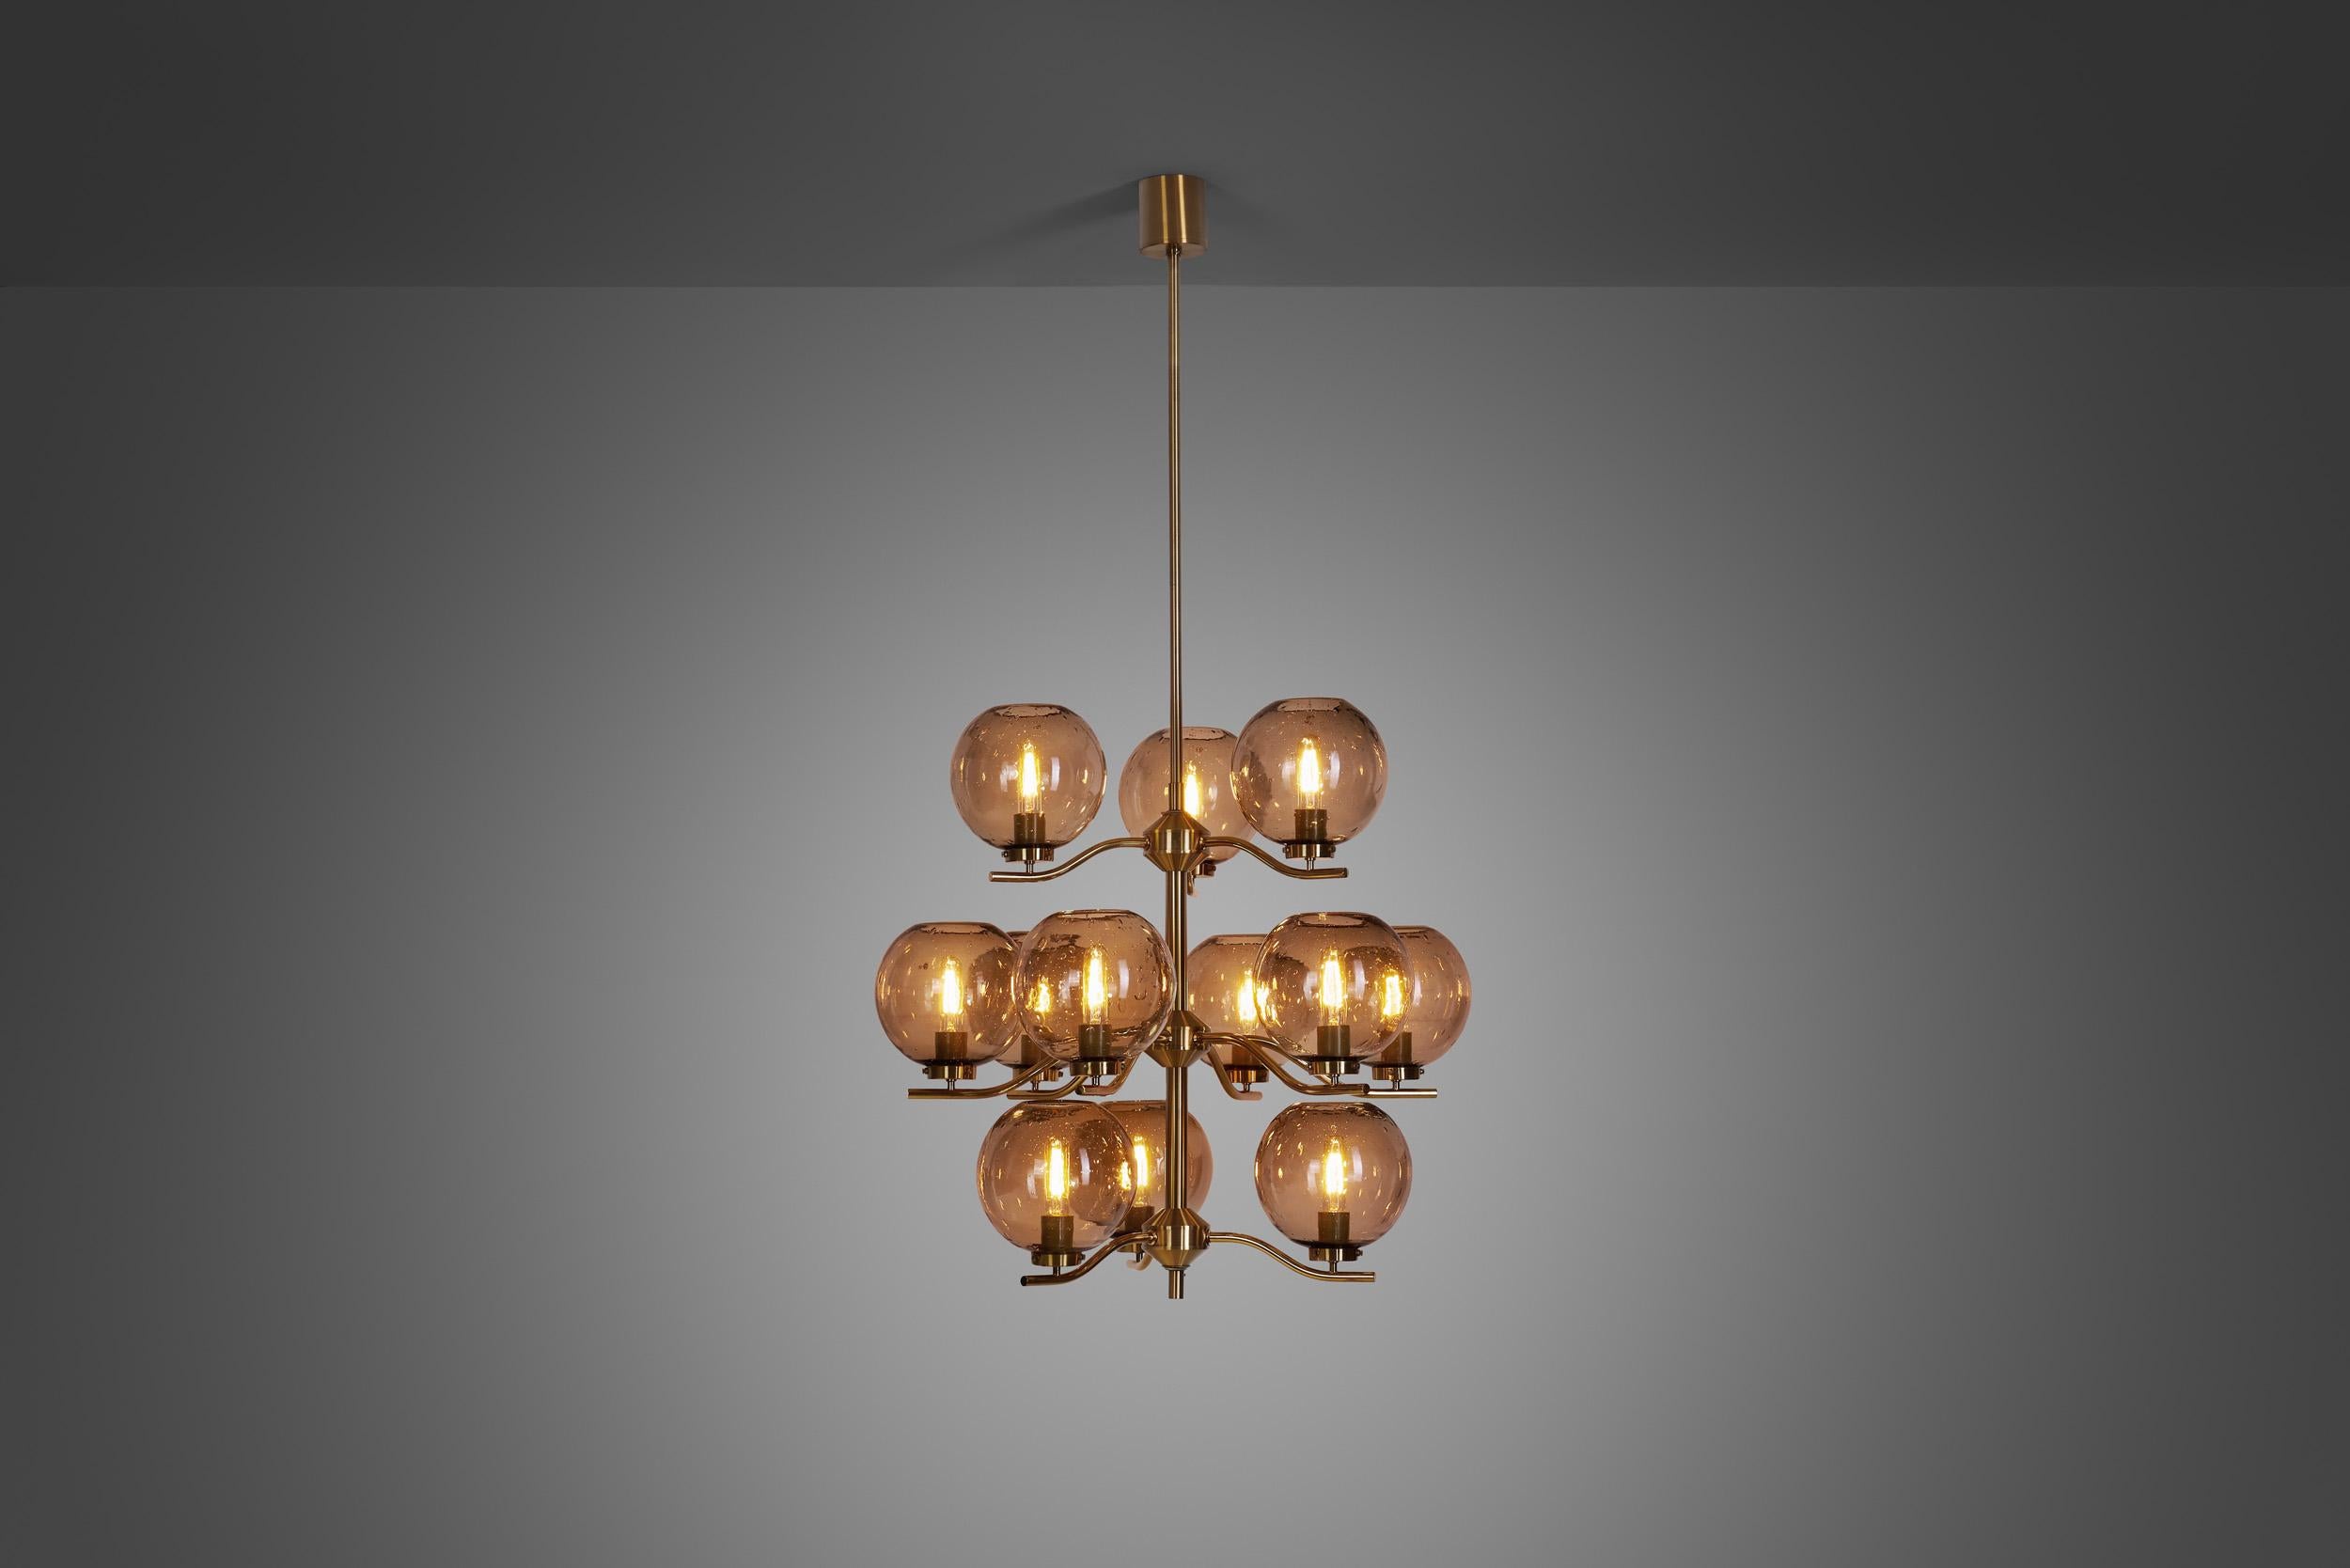 This marvellous chandelier is a rarity from Swedish designer, Holger Johansson, who created it for his own company, Westal. With a brass frame holding 12 translucent bubble glass shades, grandiose and stylish are the words to describe this model